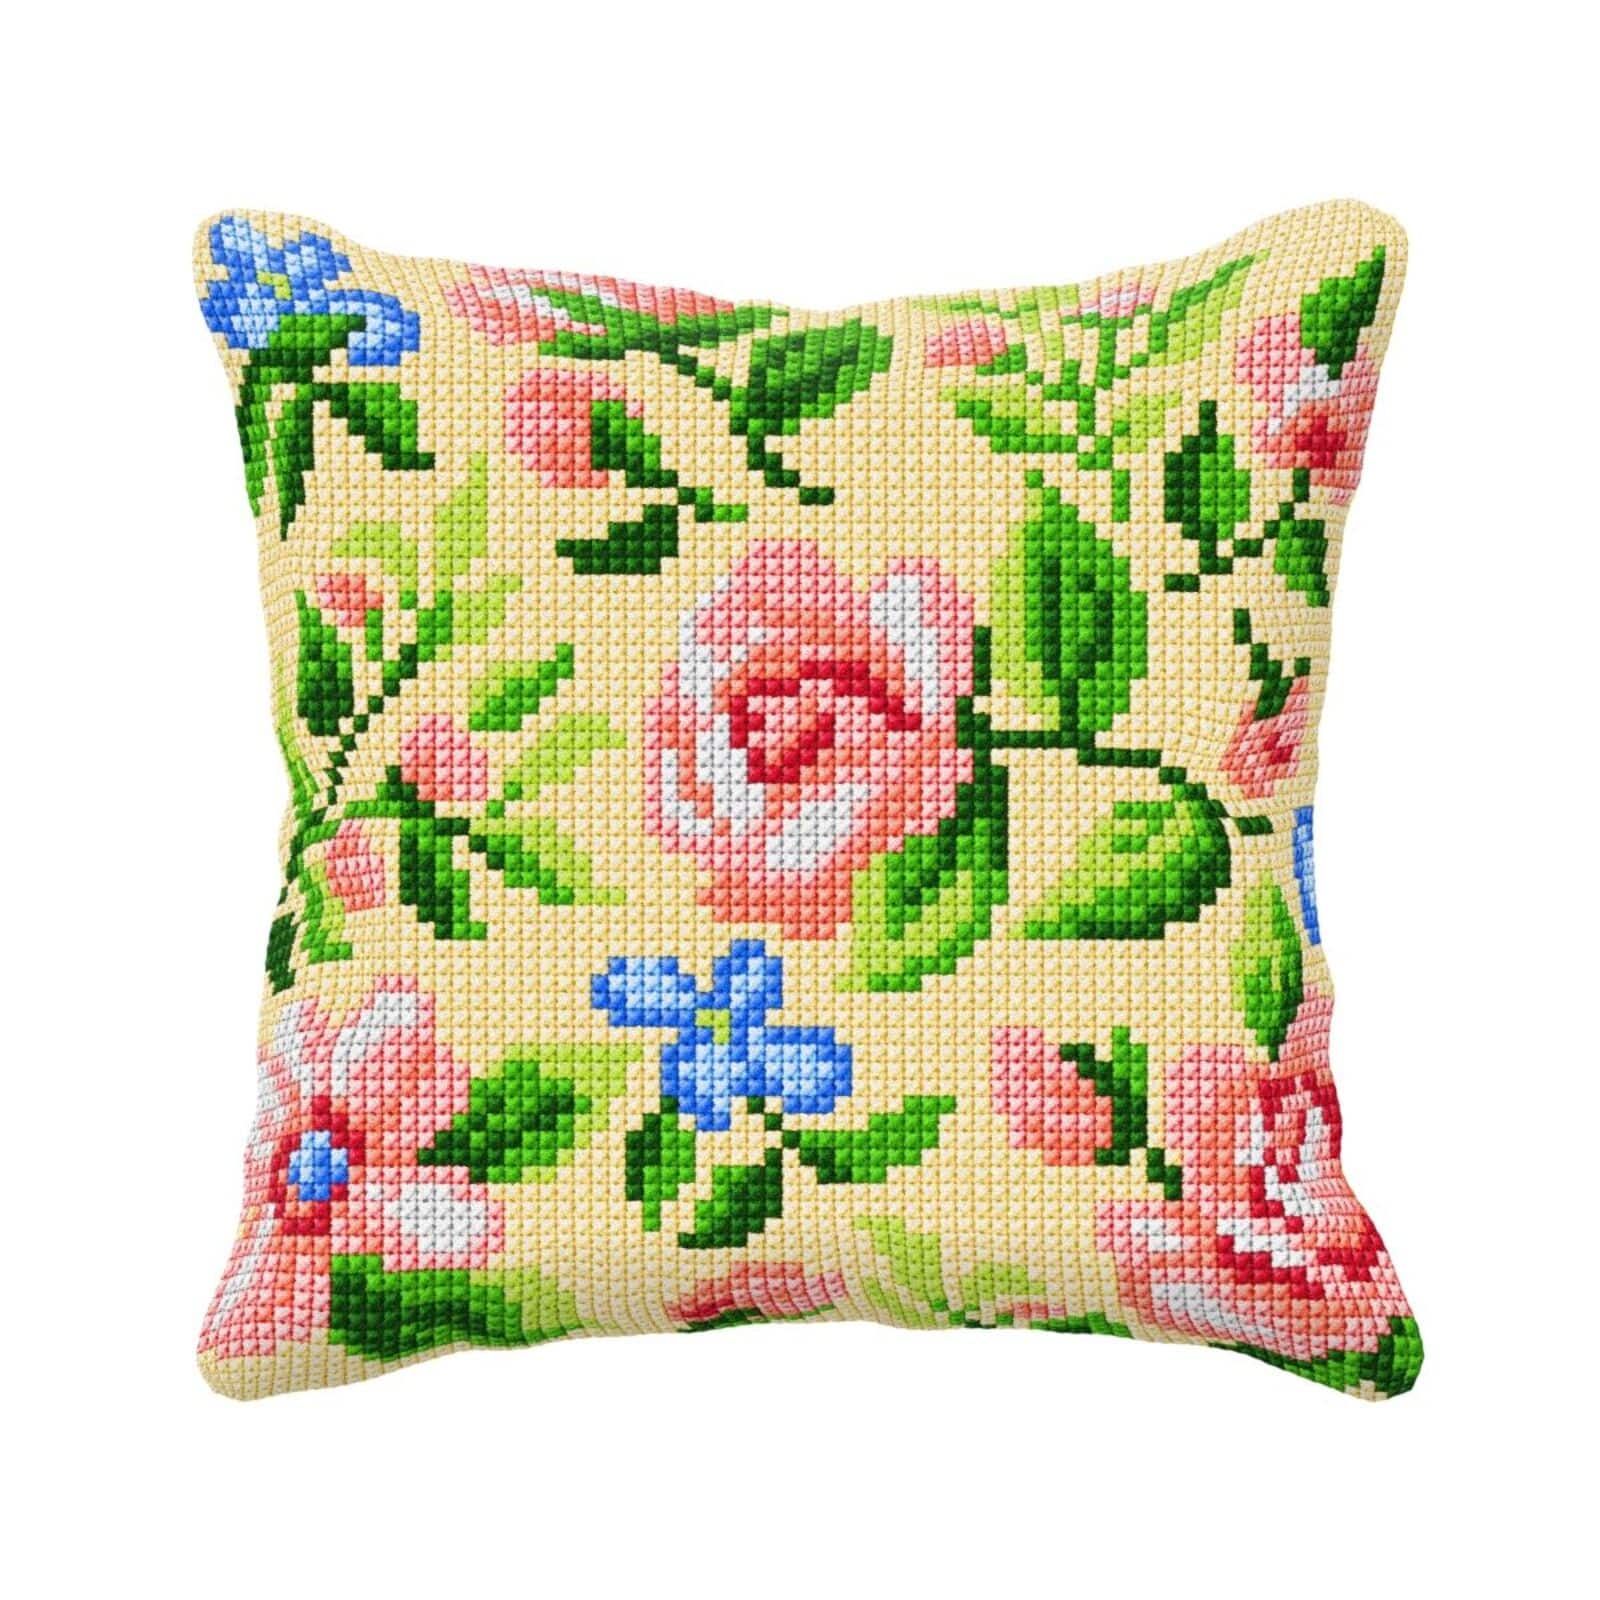 Orchidea Needlepoint Kit Cushion - Printed Canvas Roses On The Beighe Background